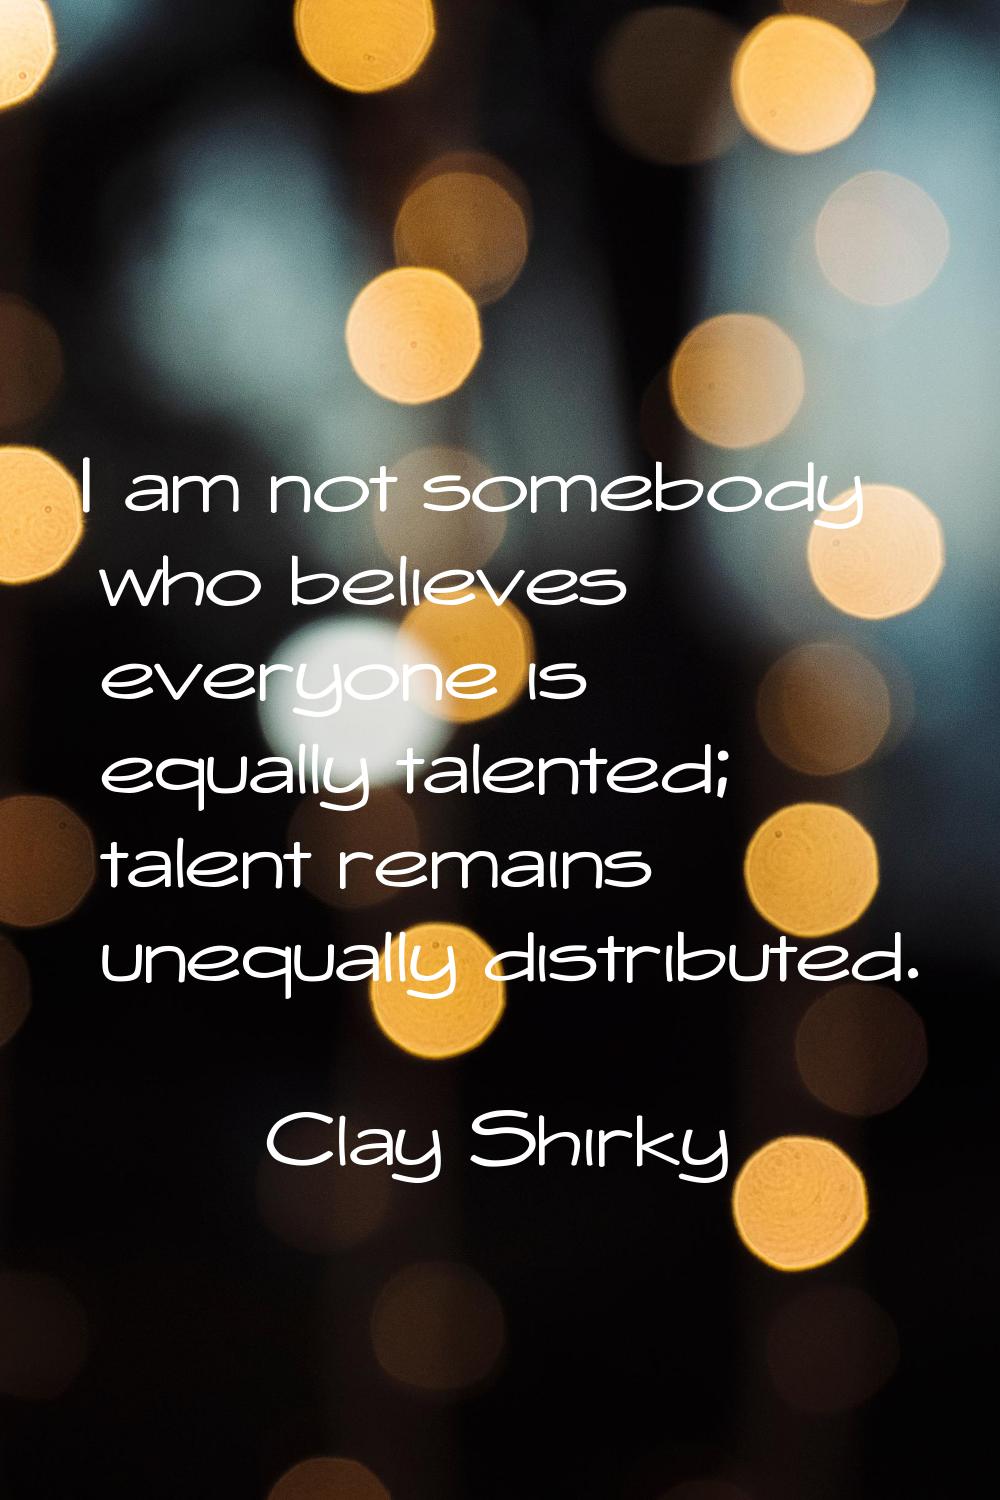 I am not somebody who believes everyone is equally talented; talent remains unequally distributed.